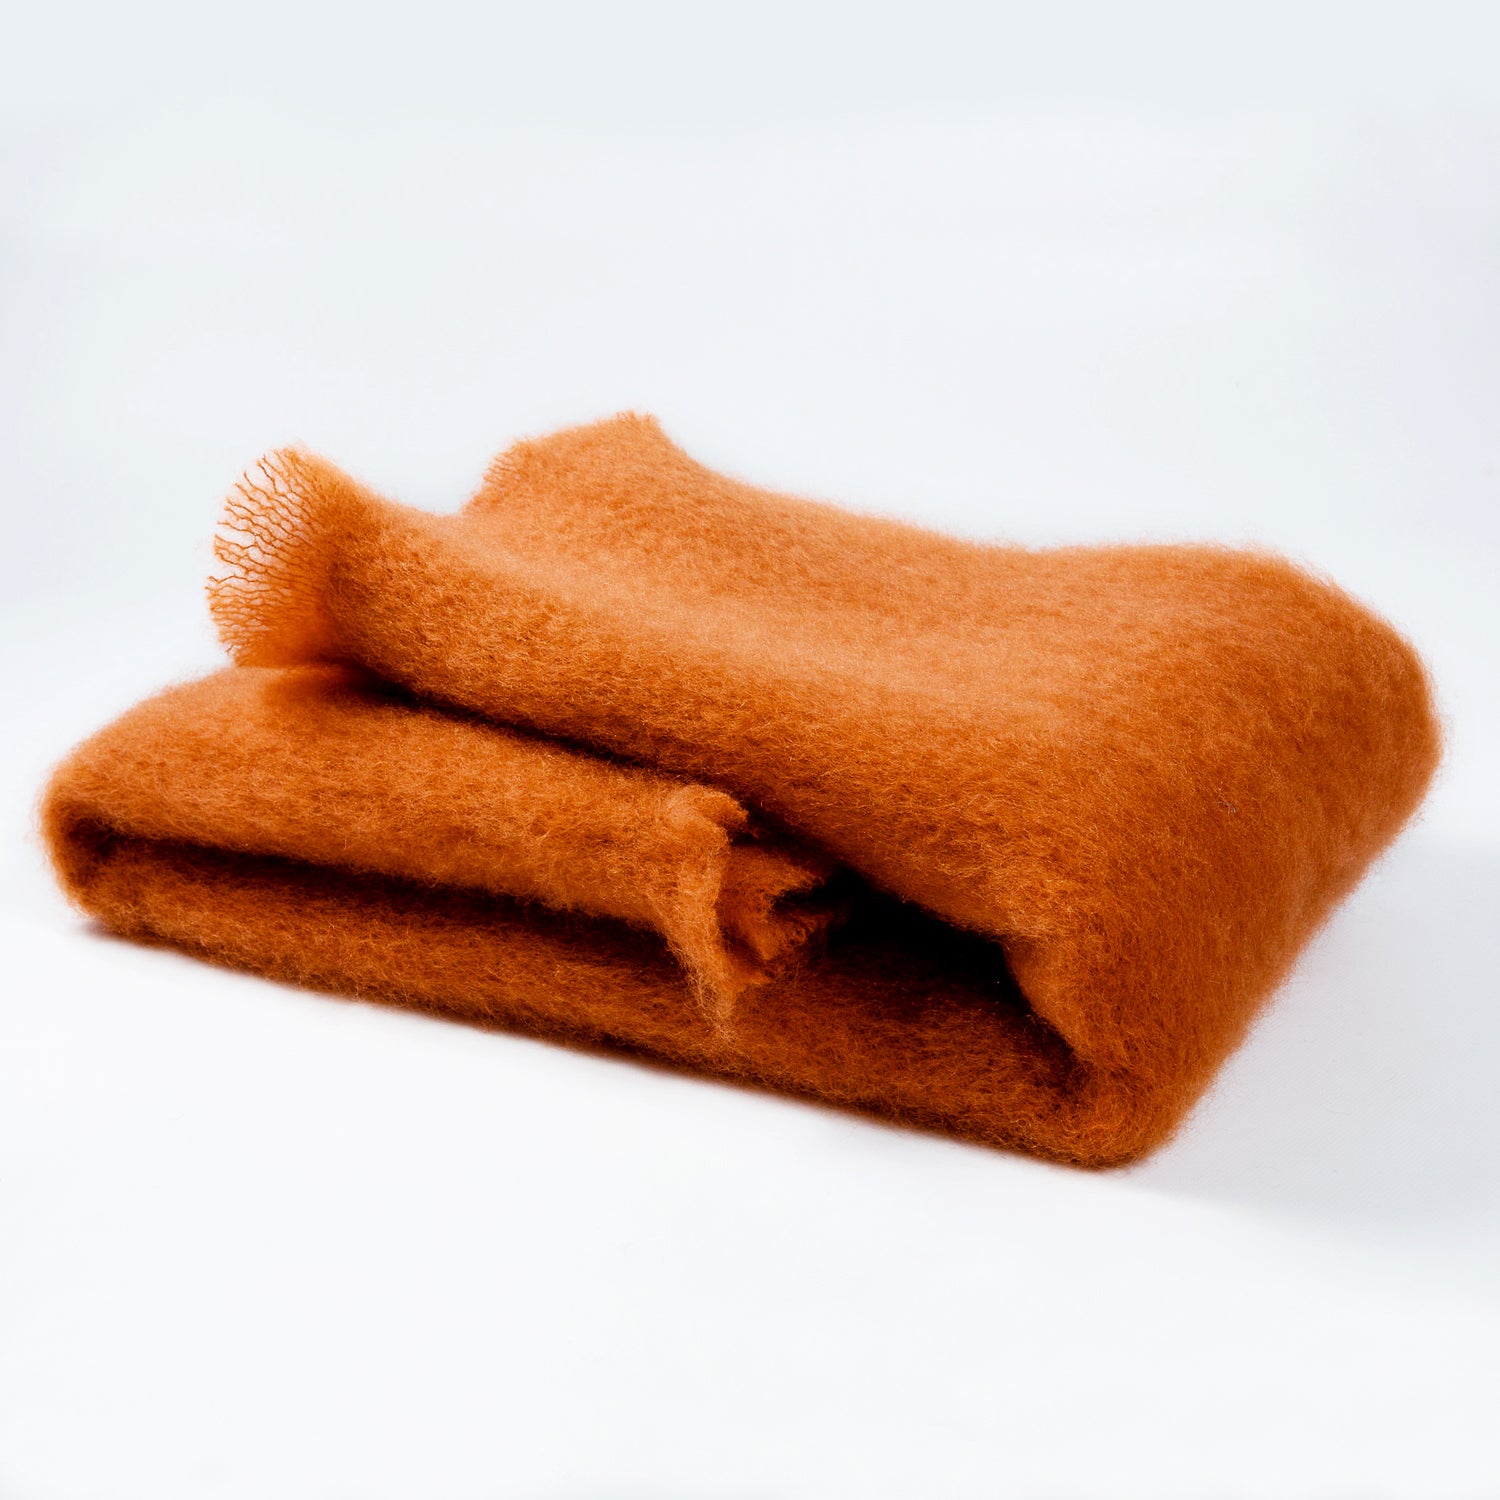 The Lisos Mohair throws from Mantas Ezcaray are distinguished by their exceptional lightness and warmth. The shine and silkiness of the fibers allow for a bright and long-lasting colour. The plush mohair fabric used to make Mantas Ezcaray's signature 'Lisos' throw is regarded as one of the most luxurious natural fibers in the world. 